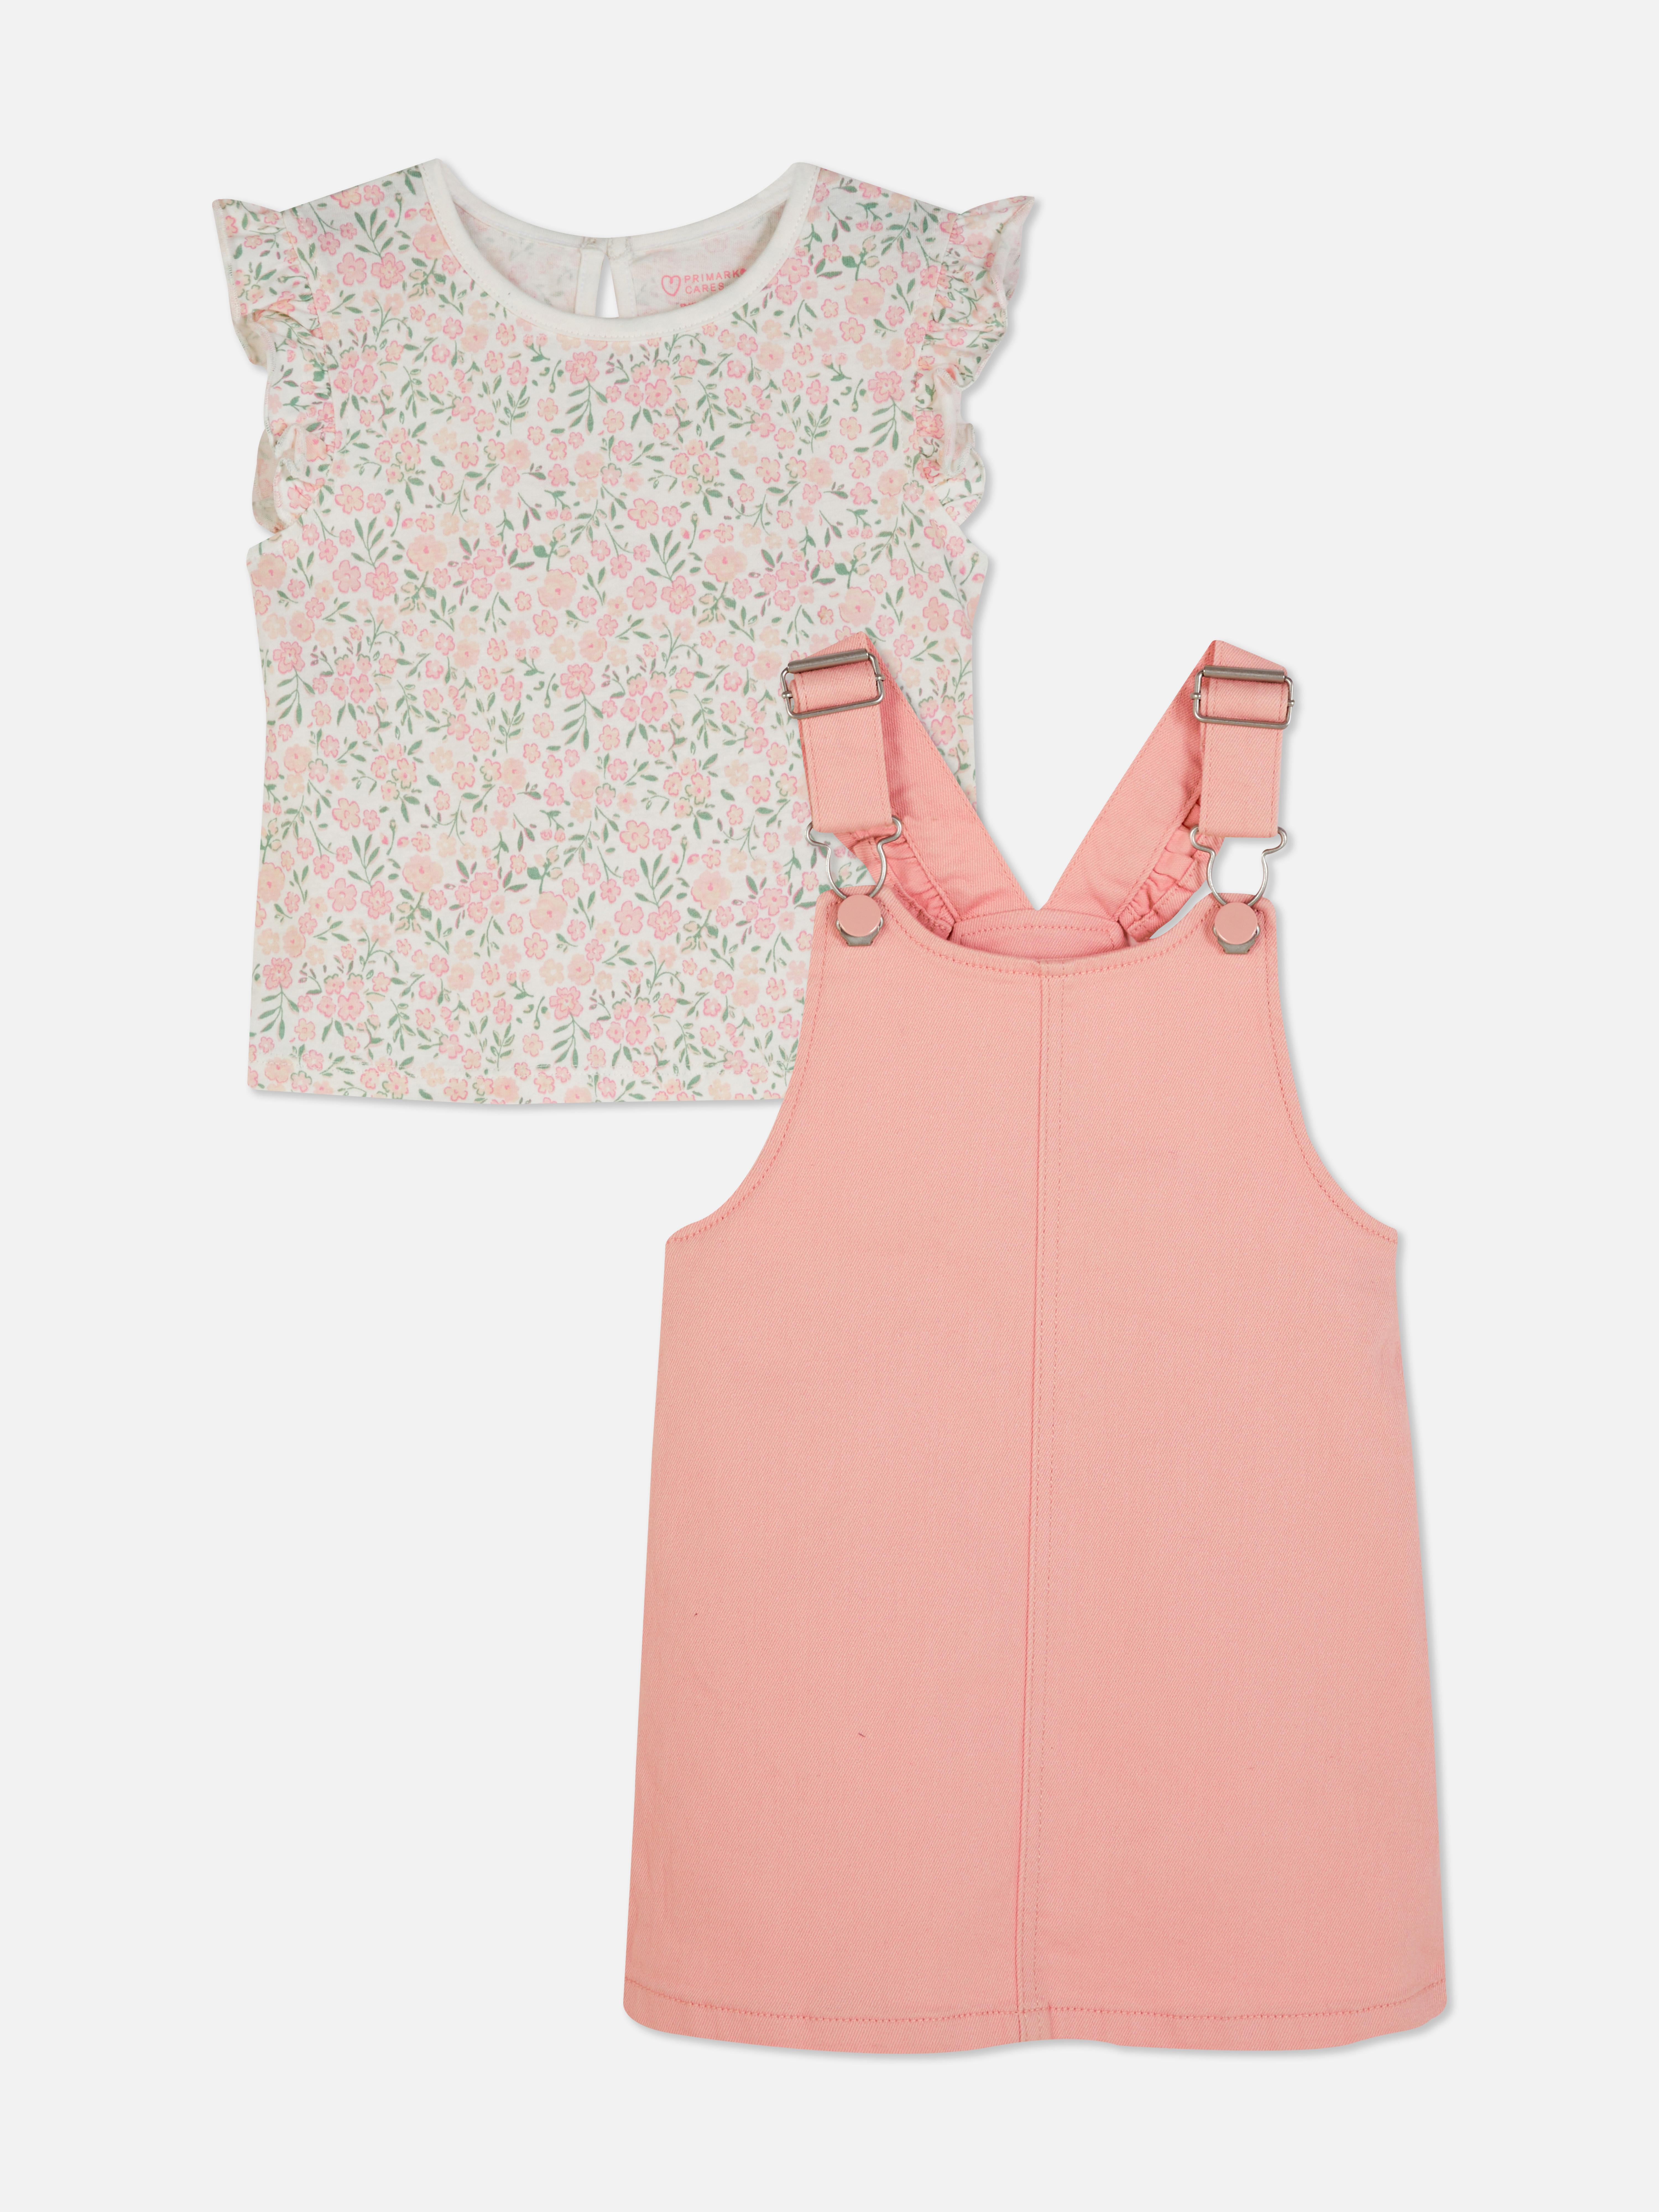 Floral Top and Overall Dress Set